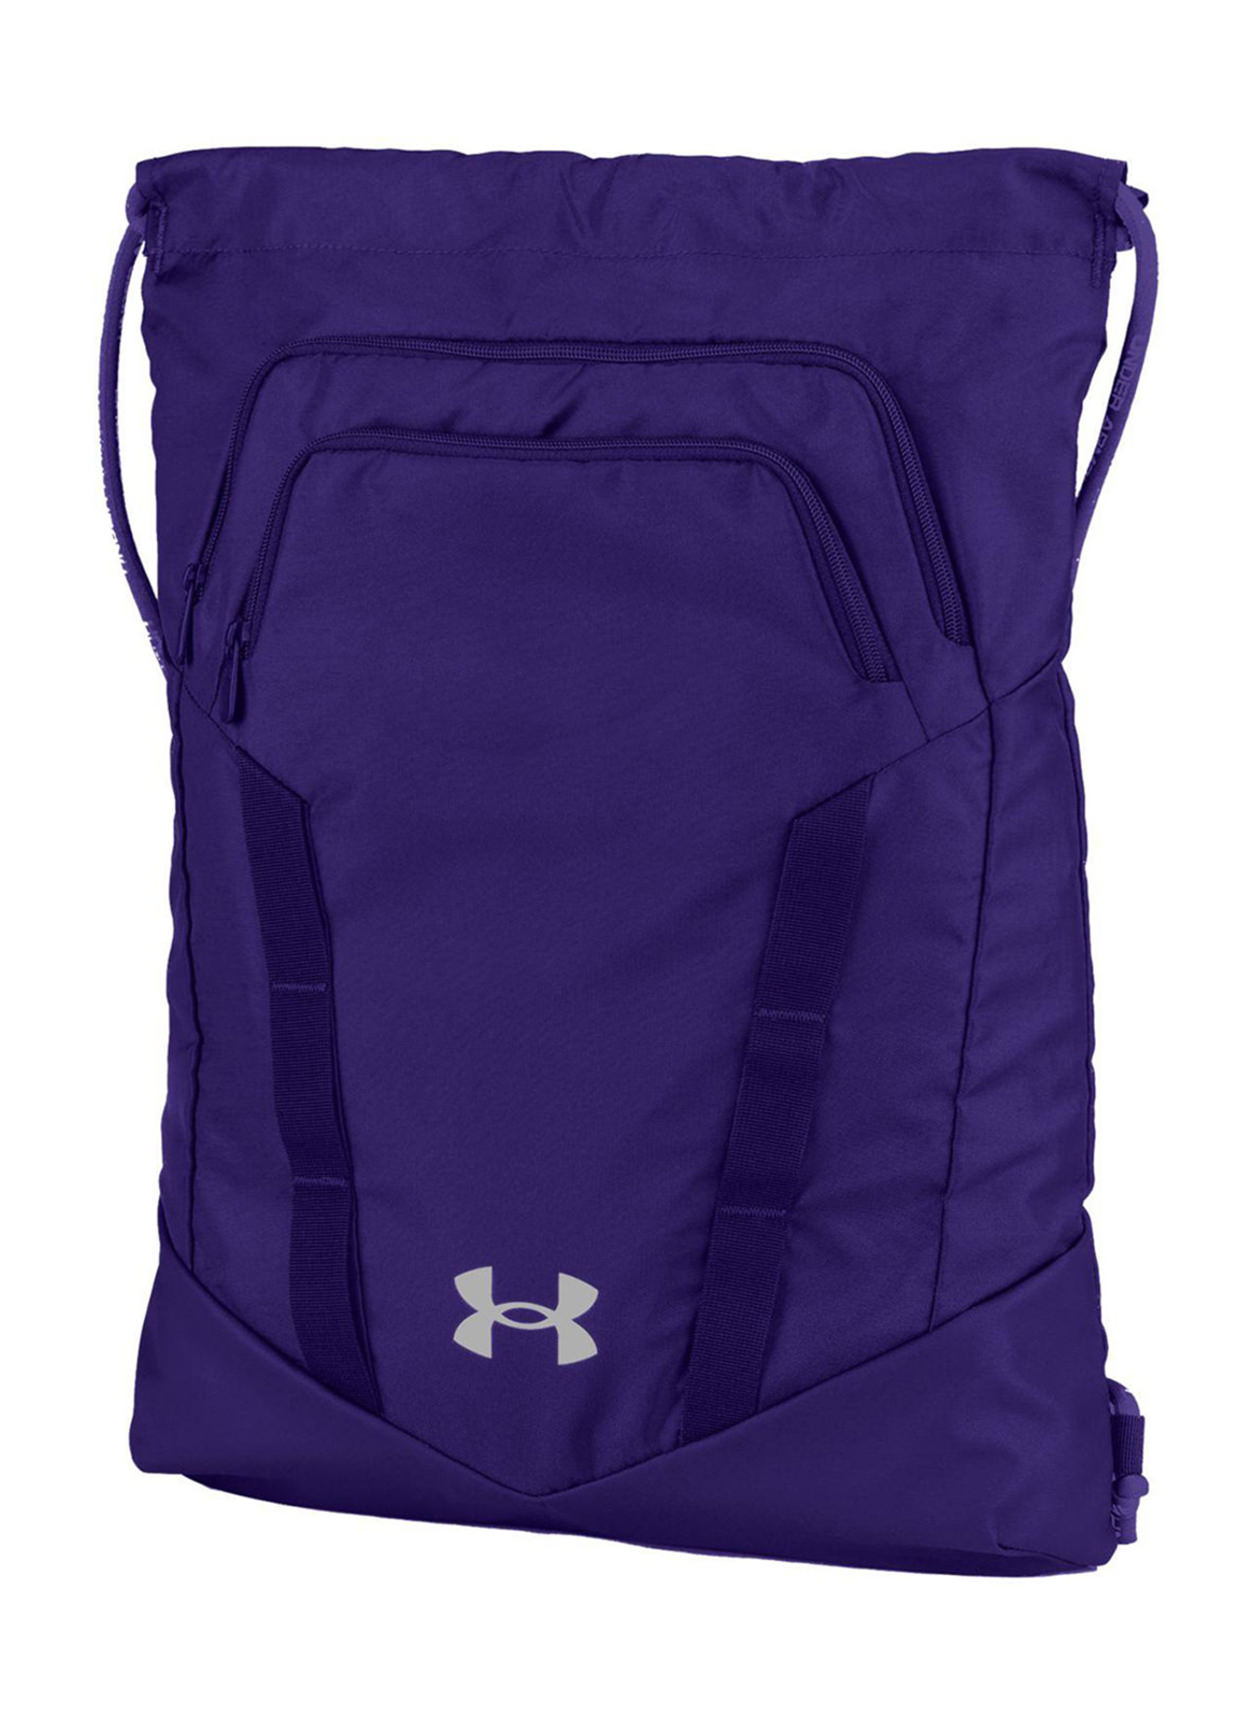 Under Armour Purple Undeniable Sackpack 2.0